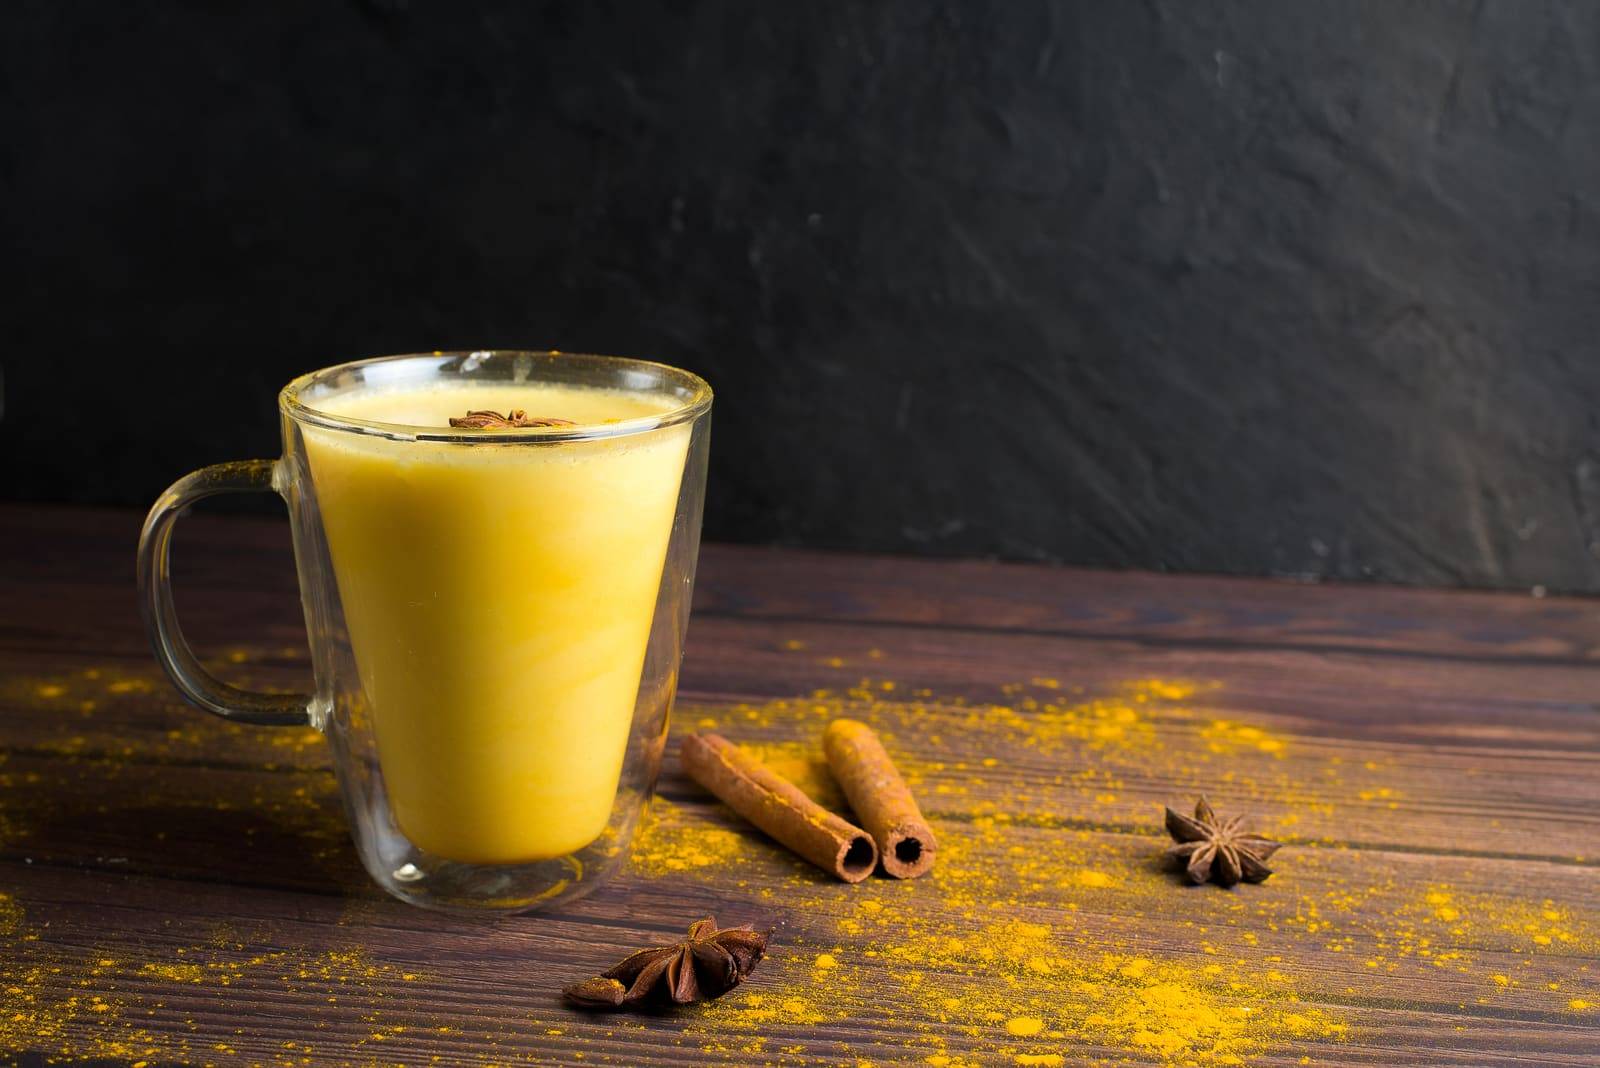 Golden turmeric milk drink with turmeric powder and ingredients